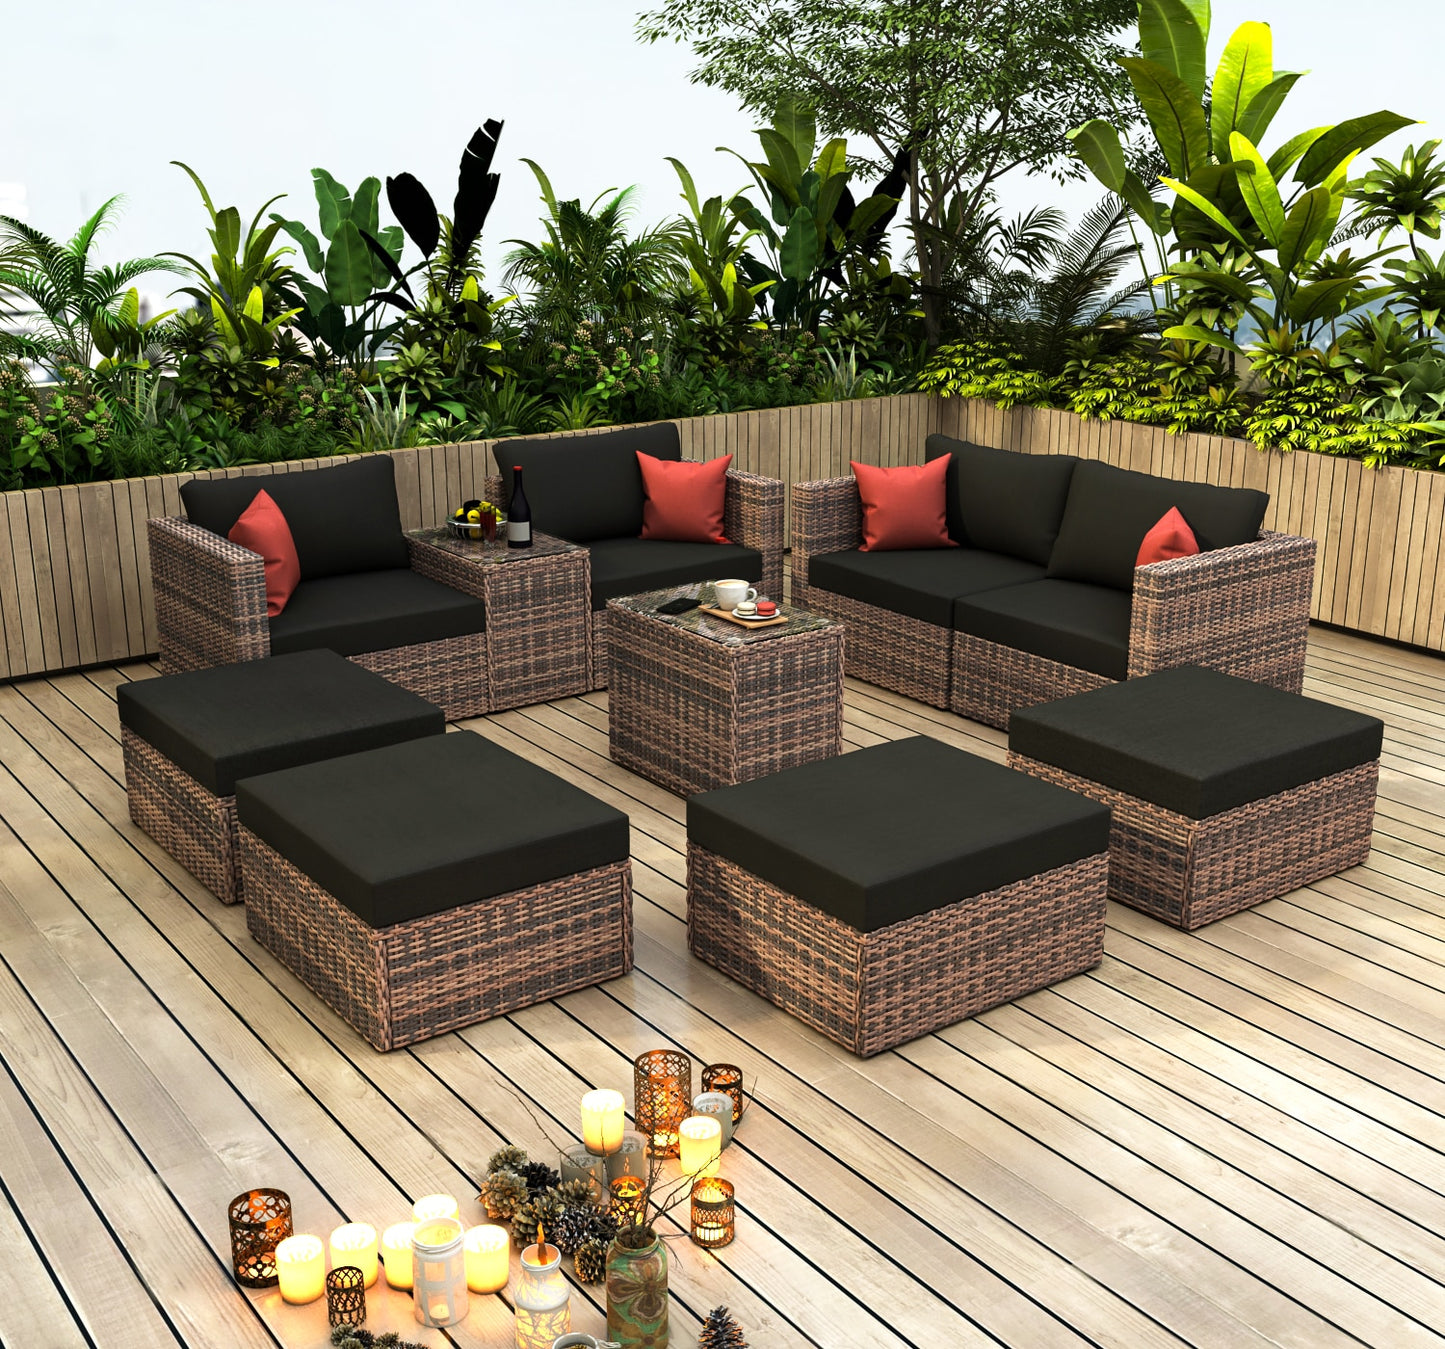 Outdoor Patio Garden chair Brown Wicker Sectional Conversation Sofa Set imitation bamboo rattan with Cushions Pillows Cover - youronestopstore23